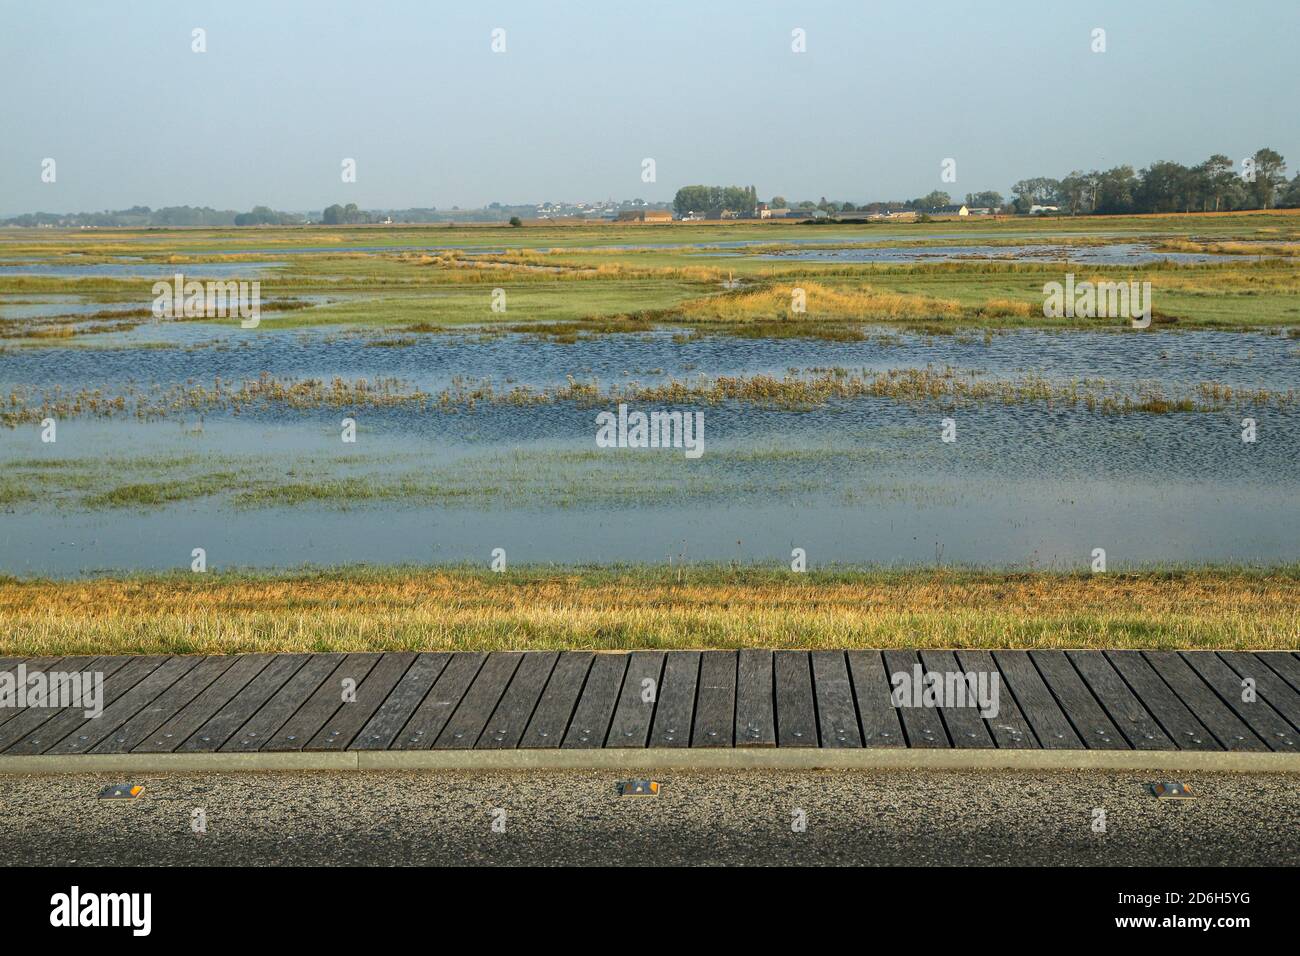 The detail of the tidal area which is being flooded by the sea during the high tide. Stock Photo